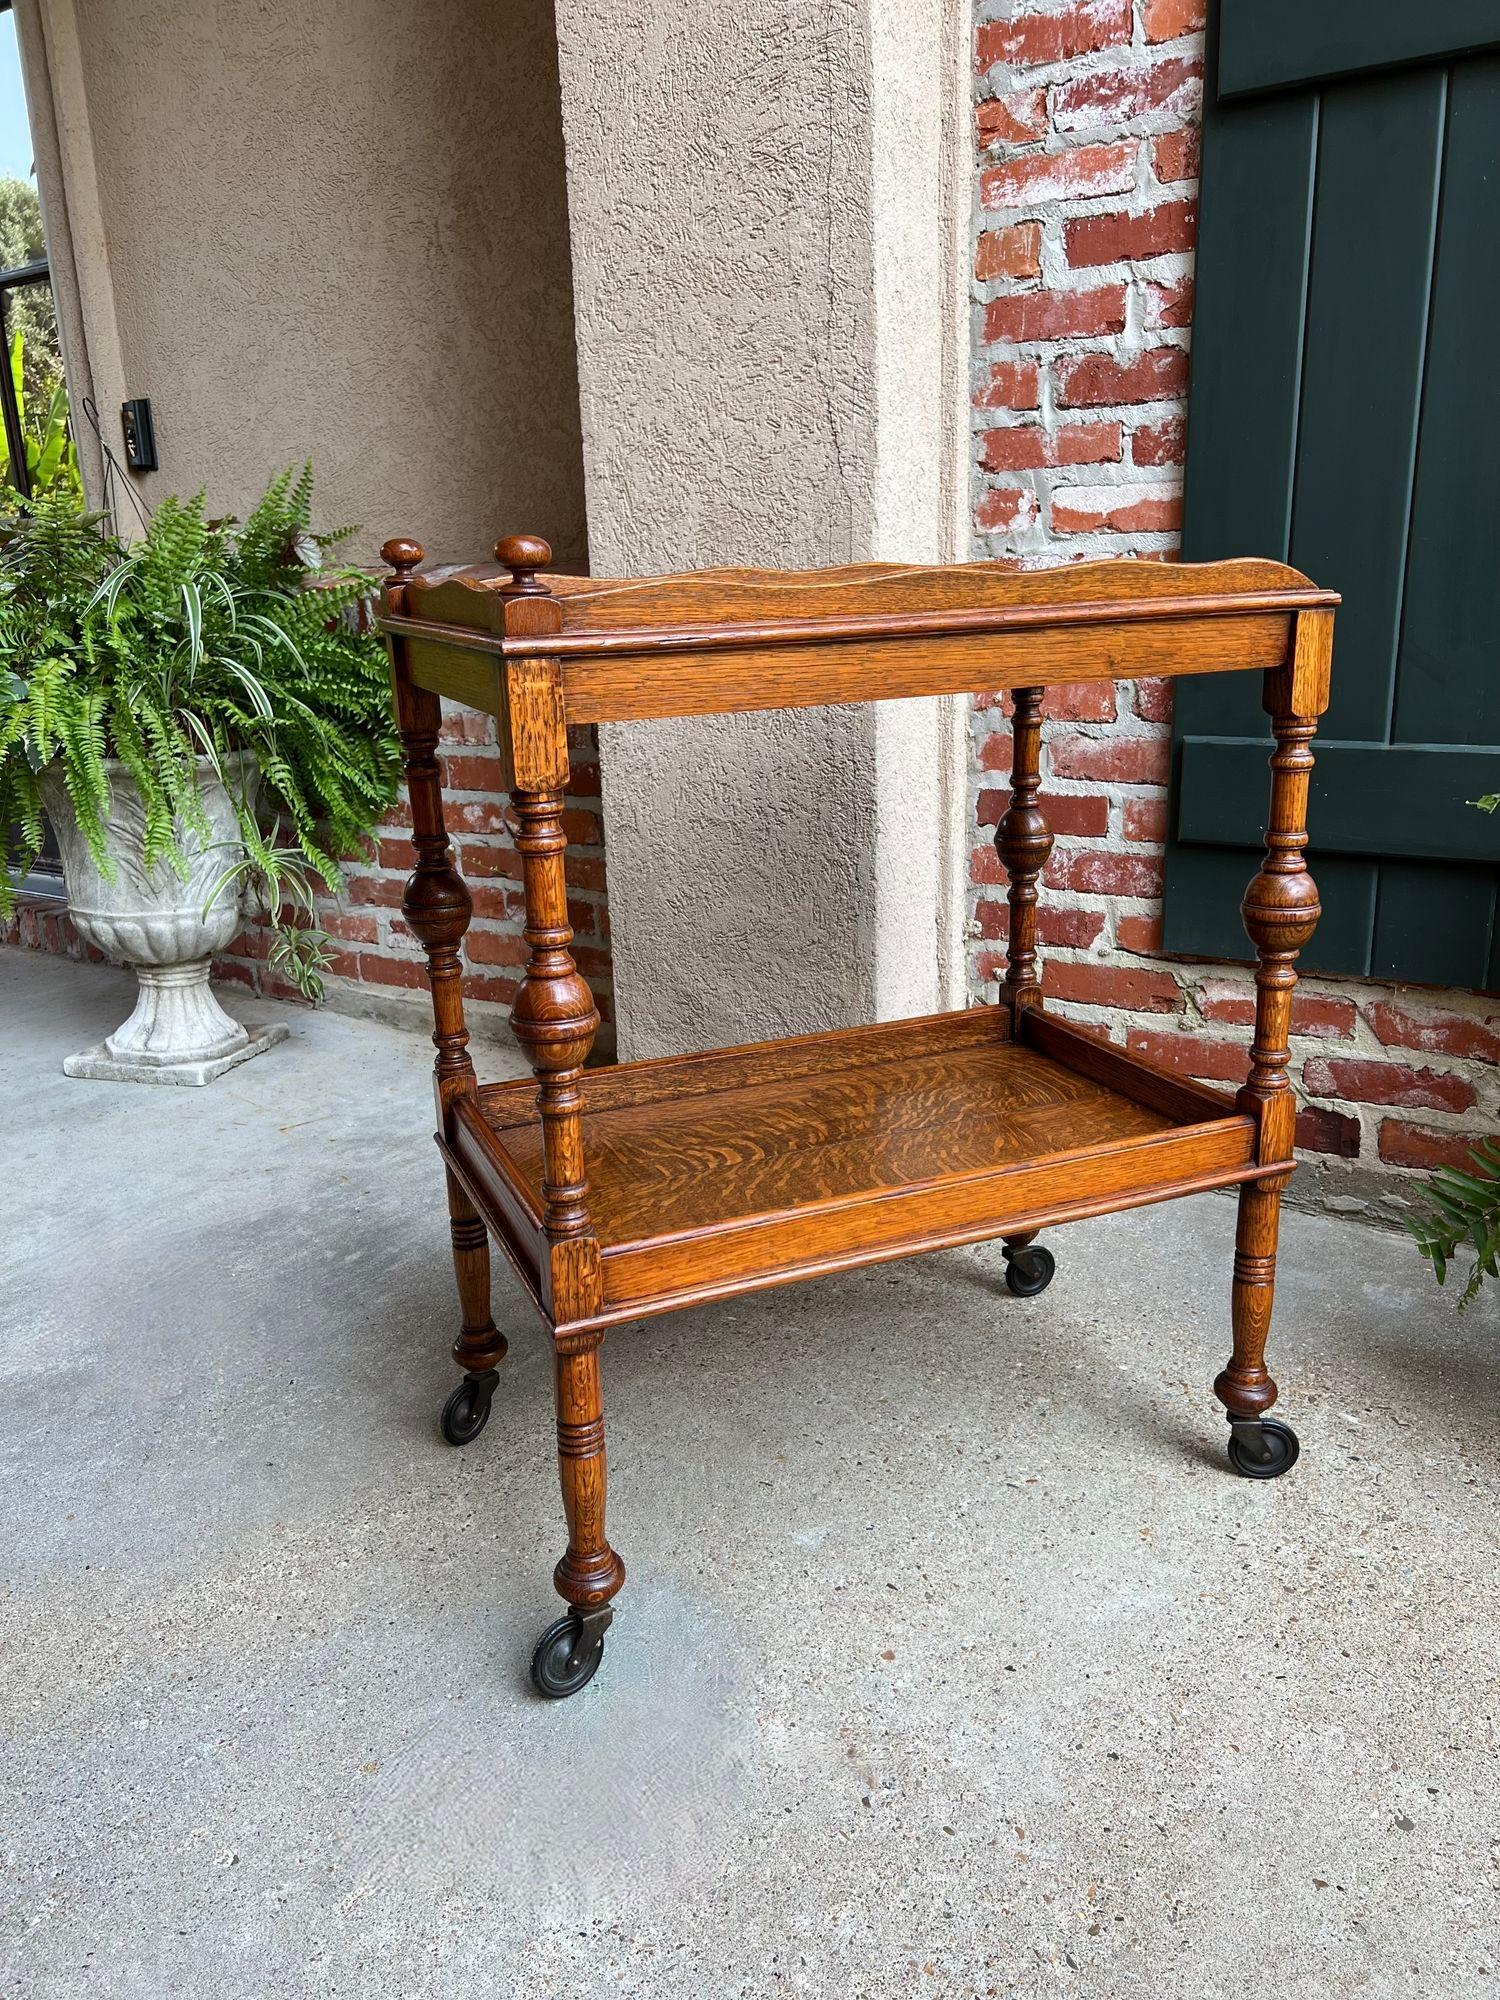 Antique English Tea Trolley Drinks Cart Tiger Oak British Rolling Cocktail Table.

Direct from England, a beautiful antique English oak tea trolley or “dumbwaiter” drinks serving cart. 
Excellent for entertaining, as a drinks or dessert cart, and